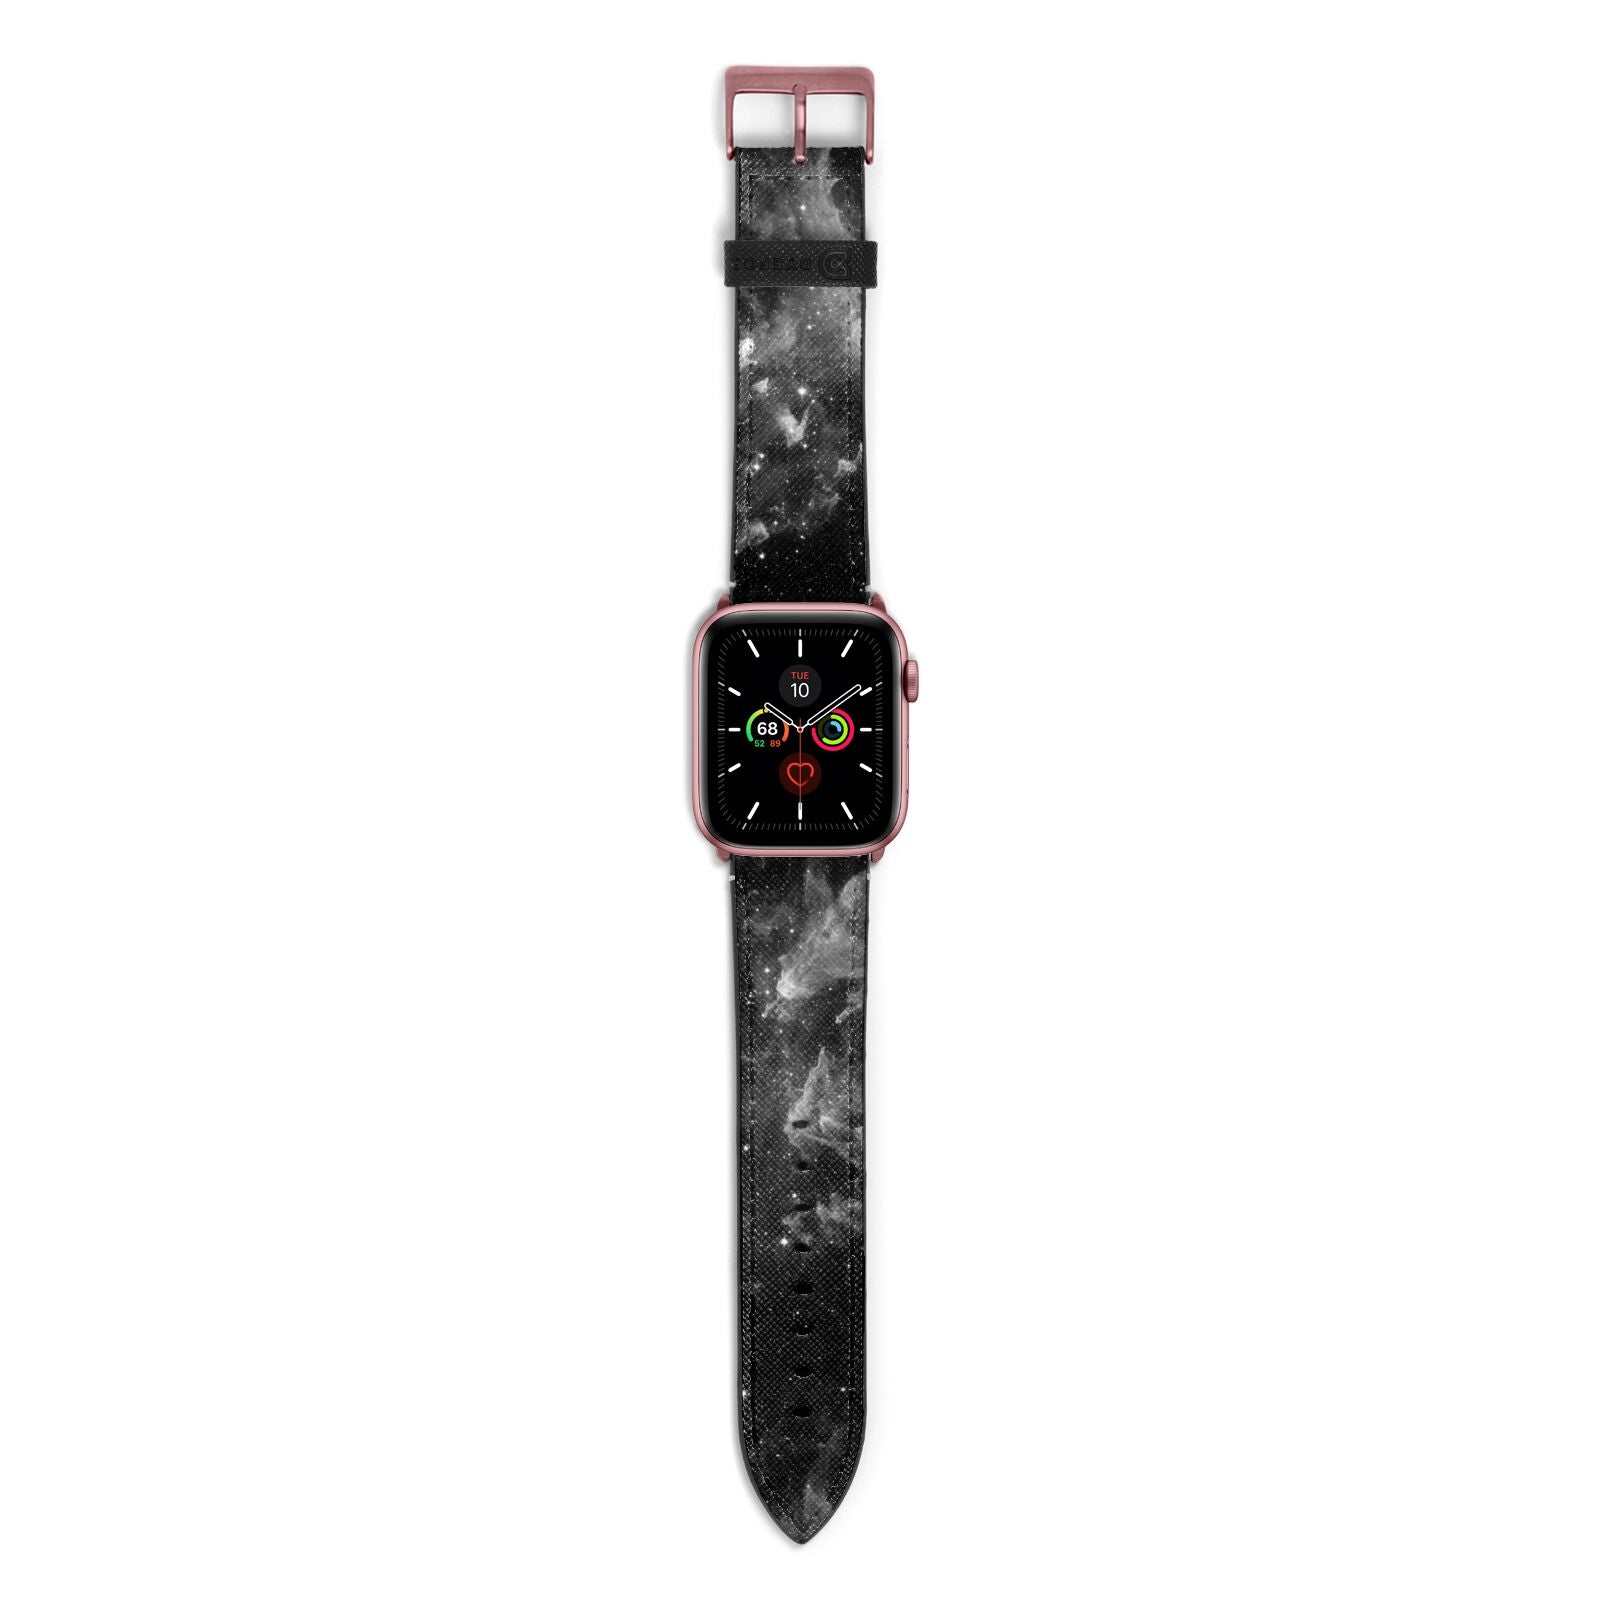 Black Space Apple Watch Strap with Rose Gold Hardware